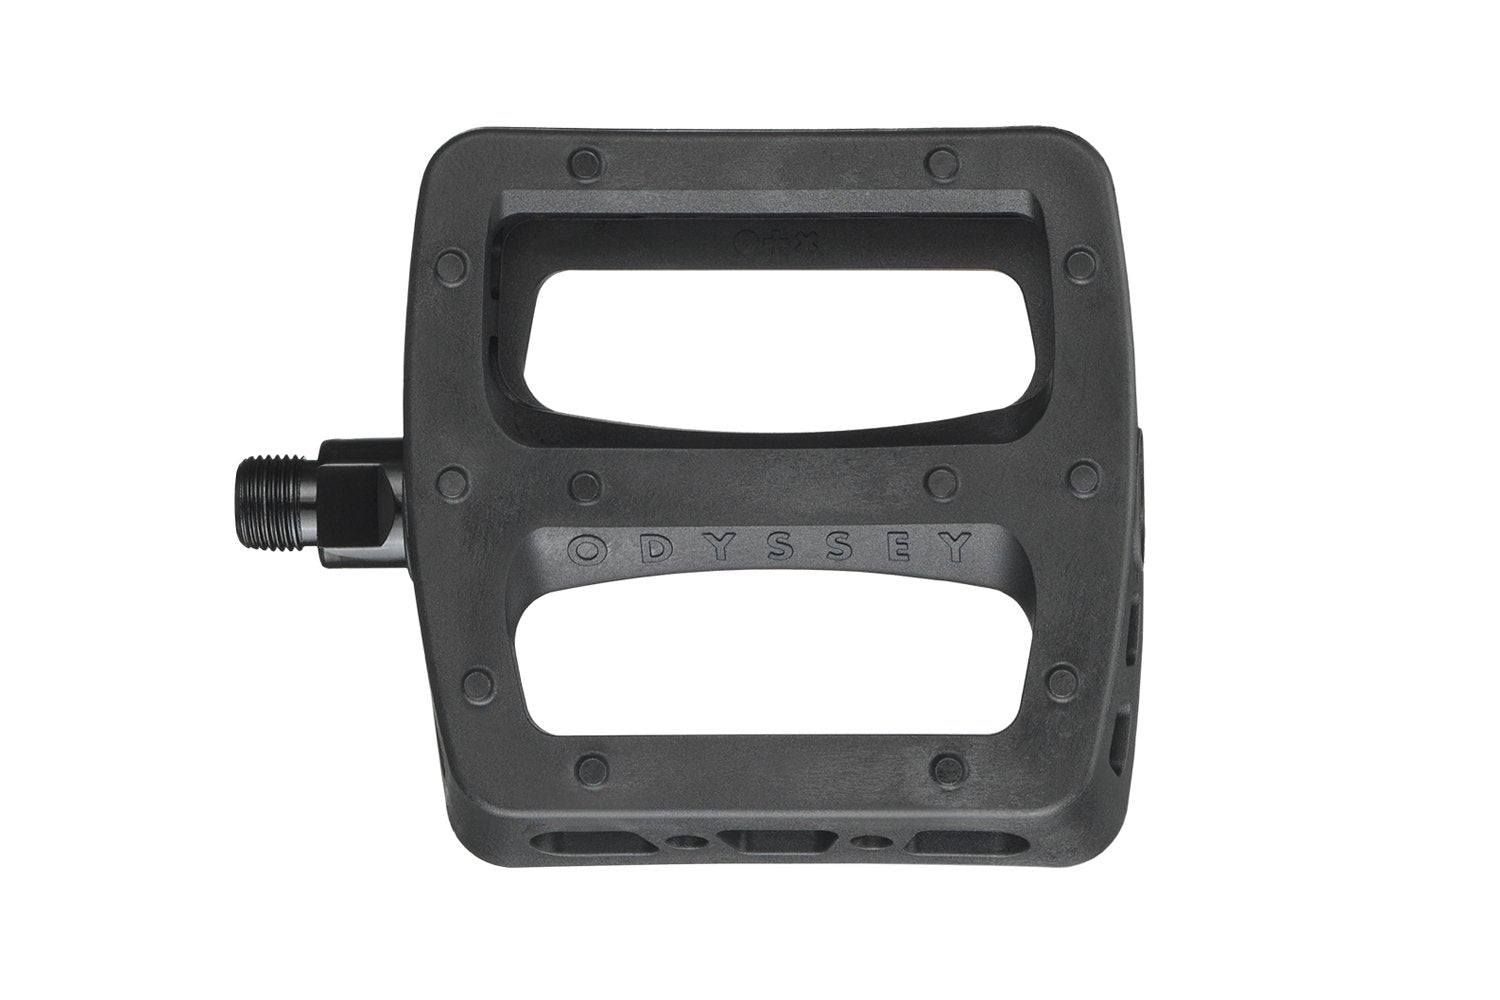 Odyssey Twisted Pro PC Pedals - Black